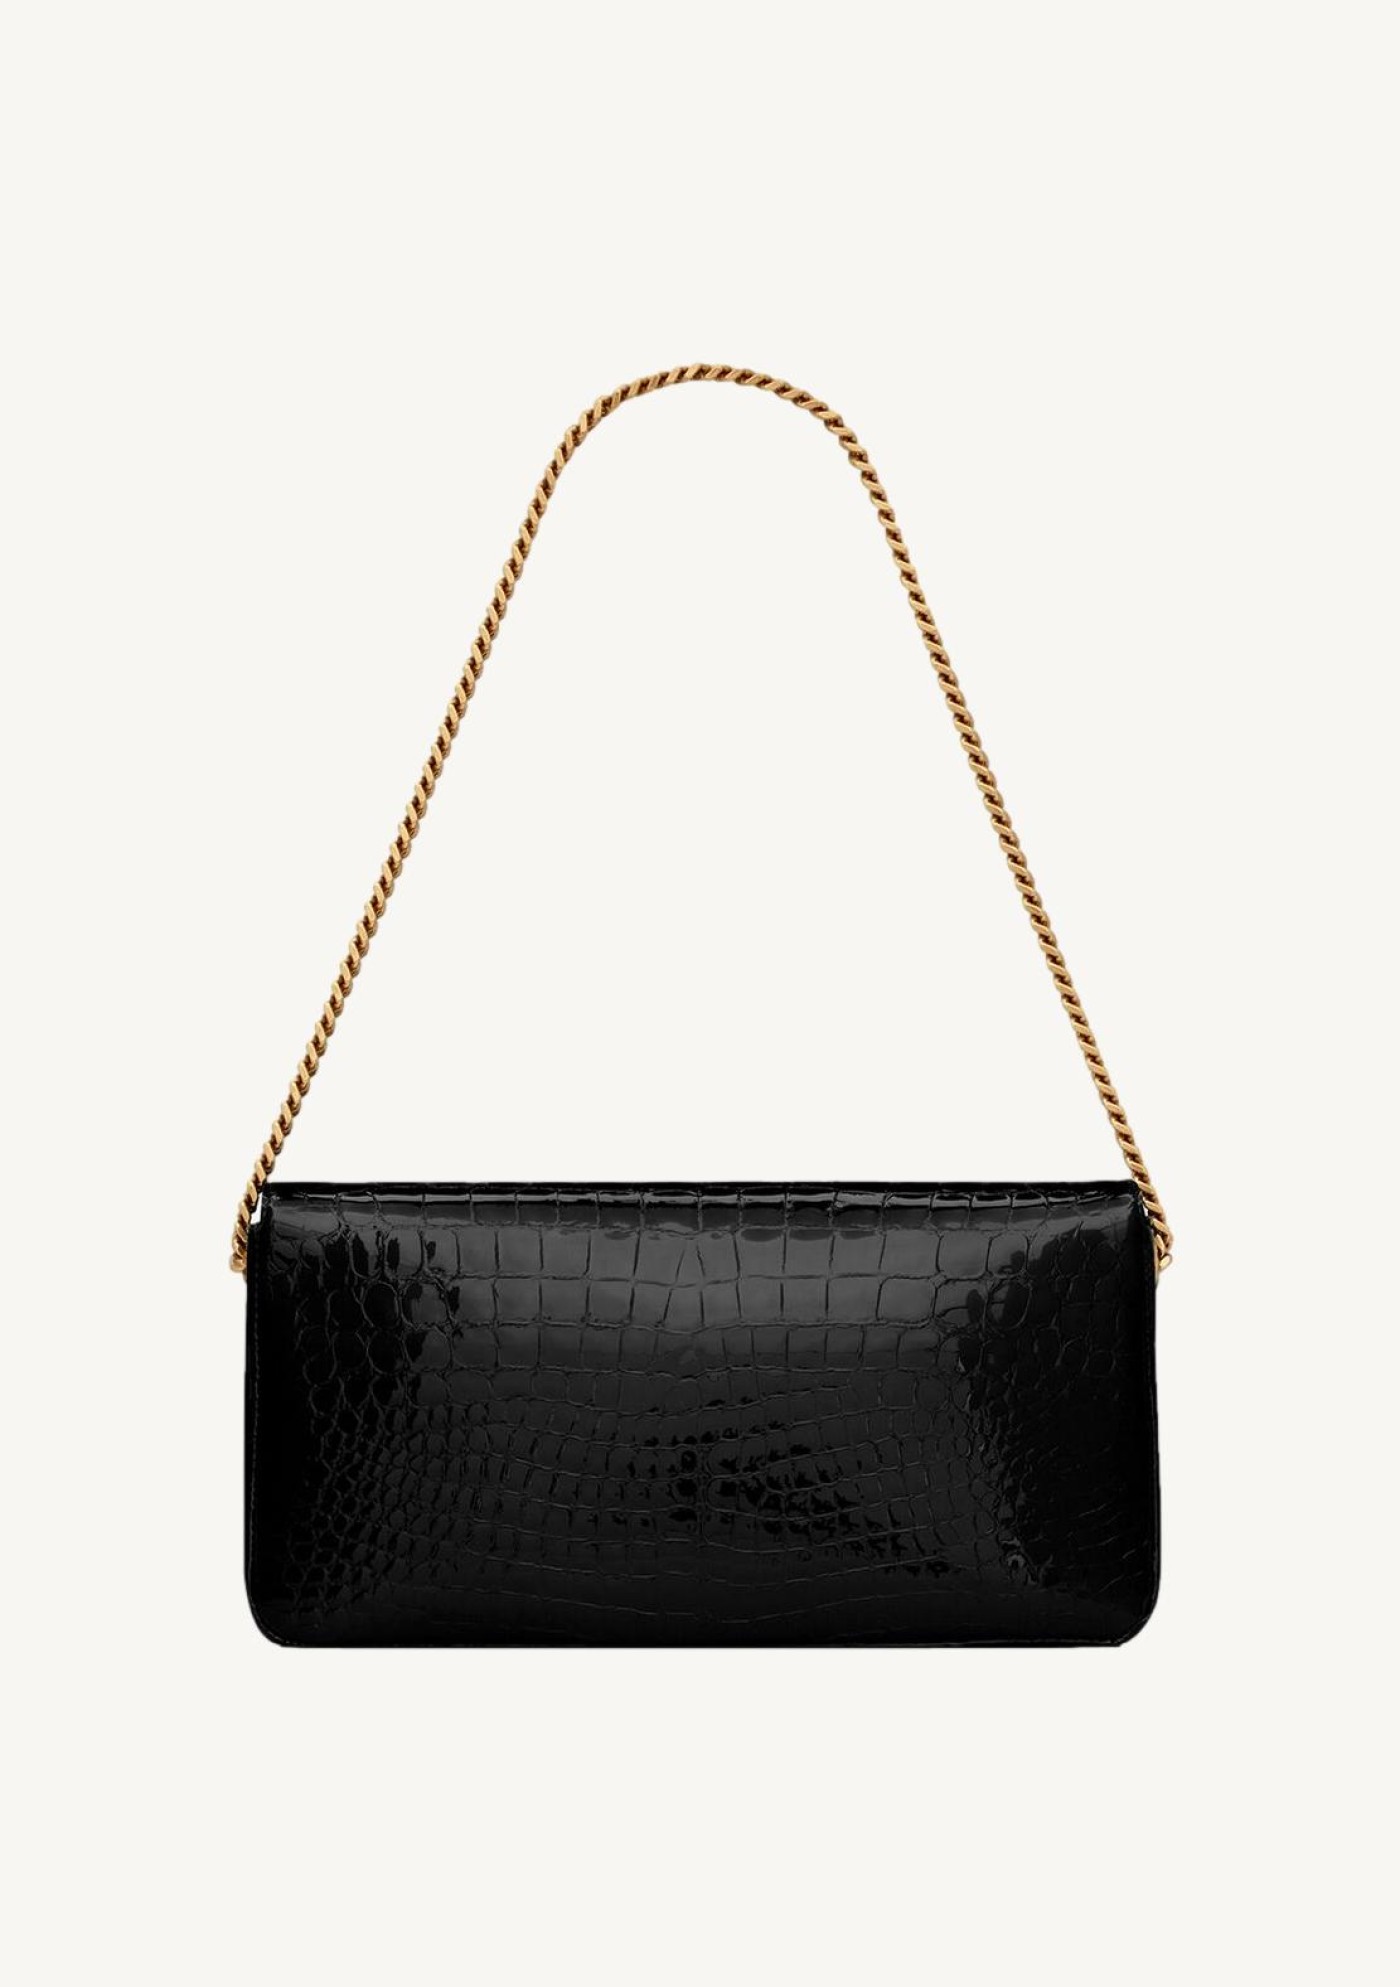 KATE 99 CHAIN BAG IN EMBOSSED ALLIGATOR LEATHER